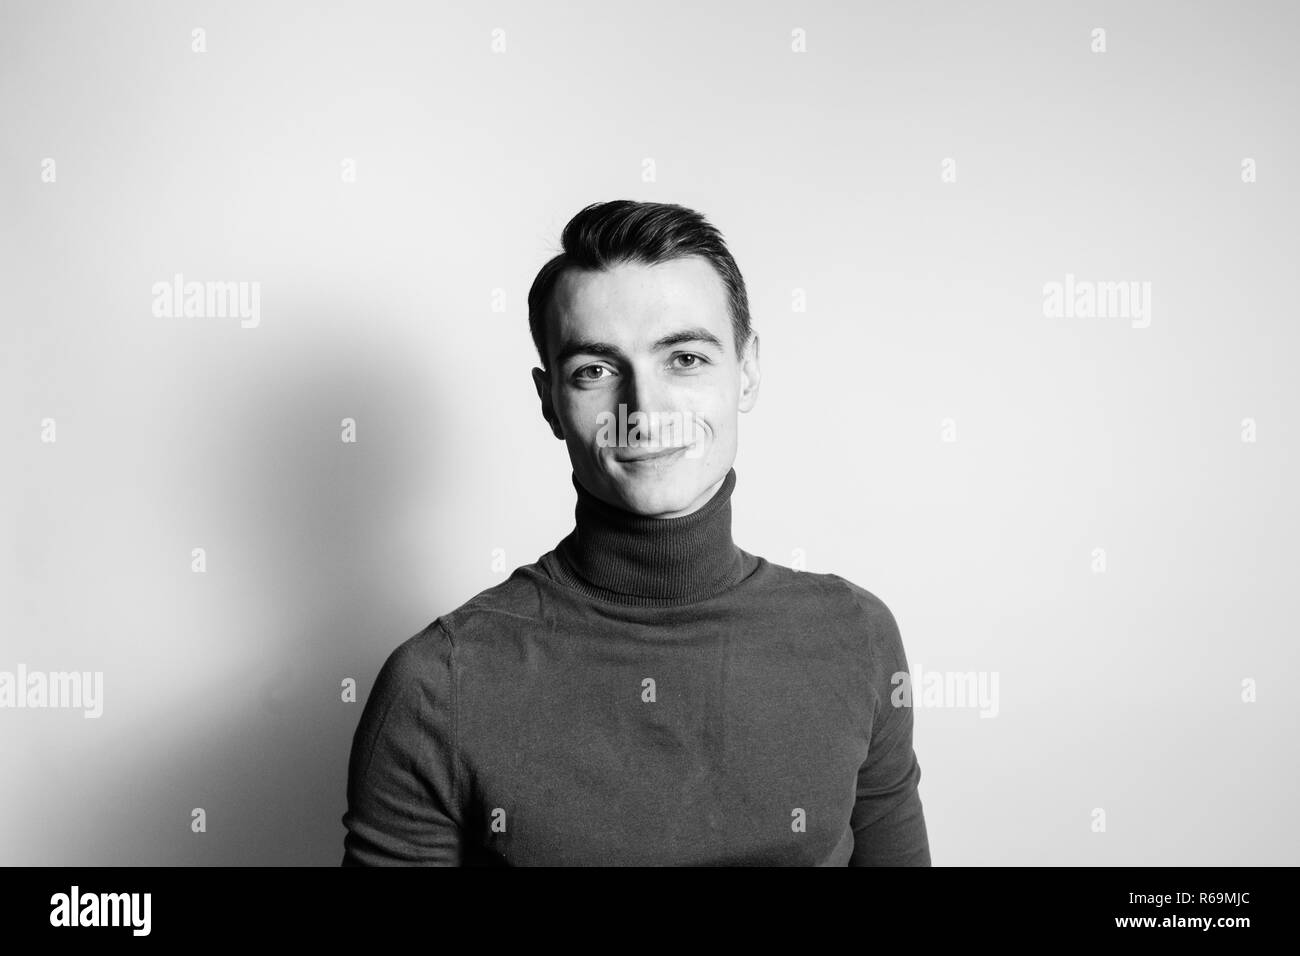 Close up black and white portrait of a young man wearing turtleneck jumper, smiling at the camera, against plain studio background Stock Photo